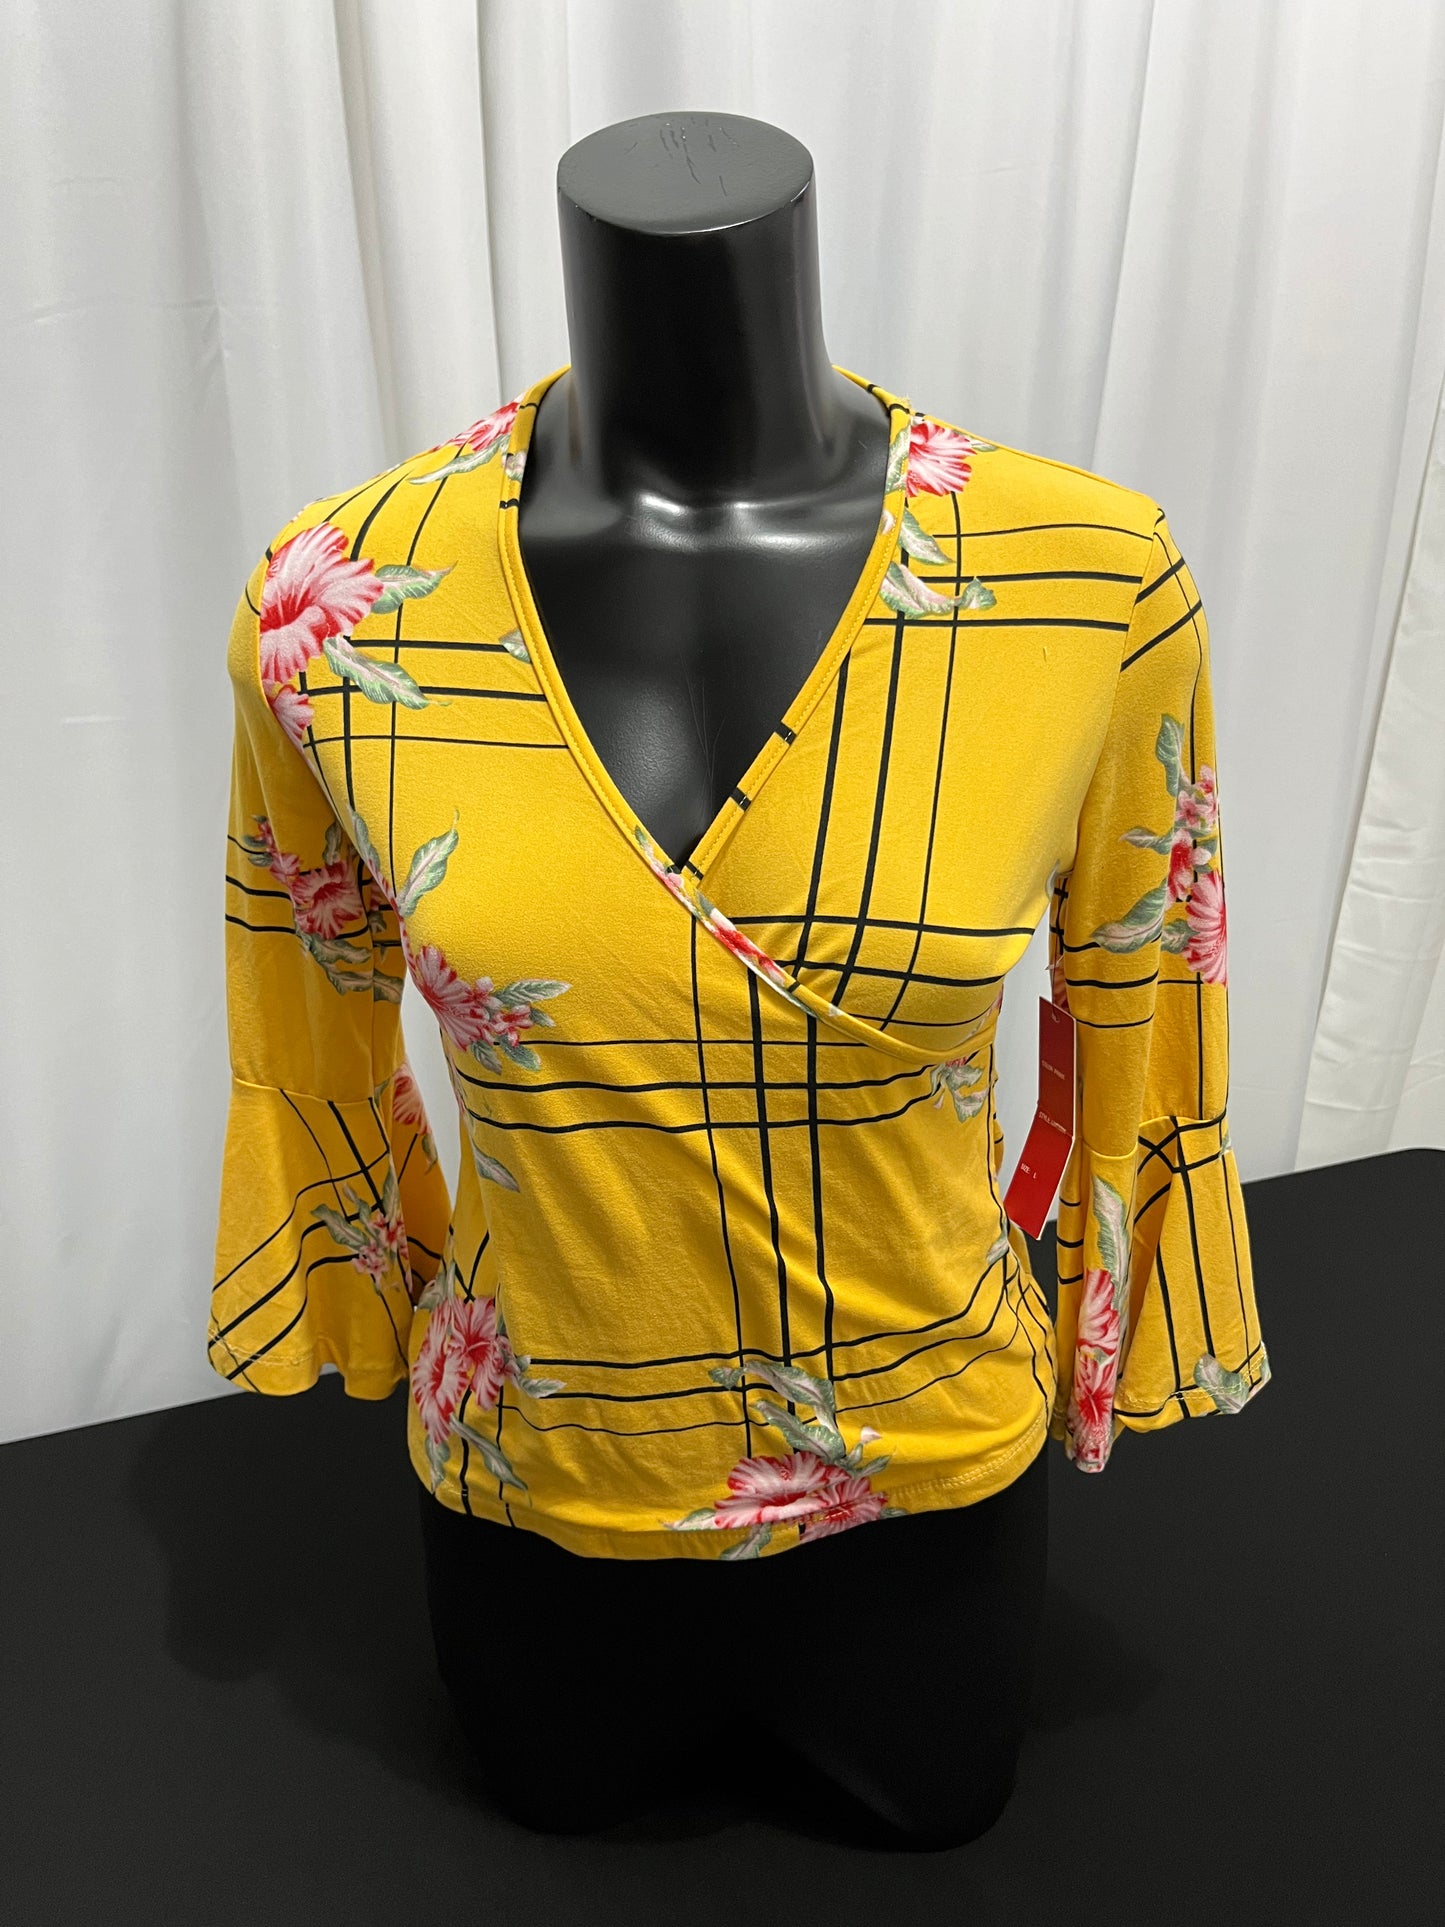 Yellow with Flowers Top